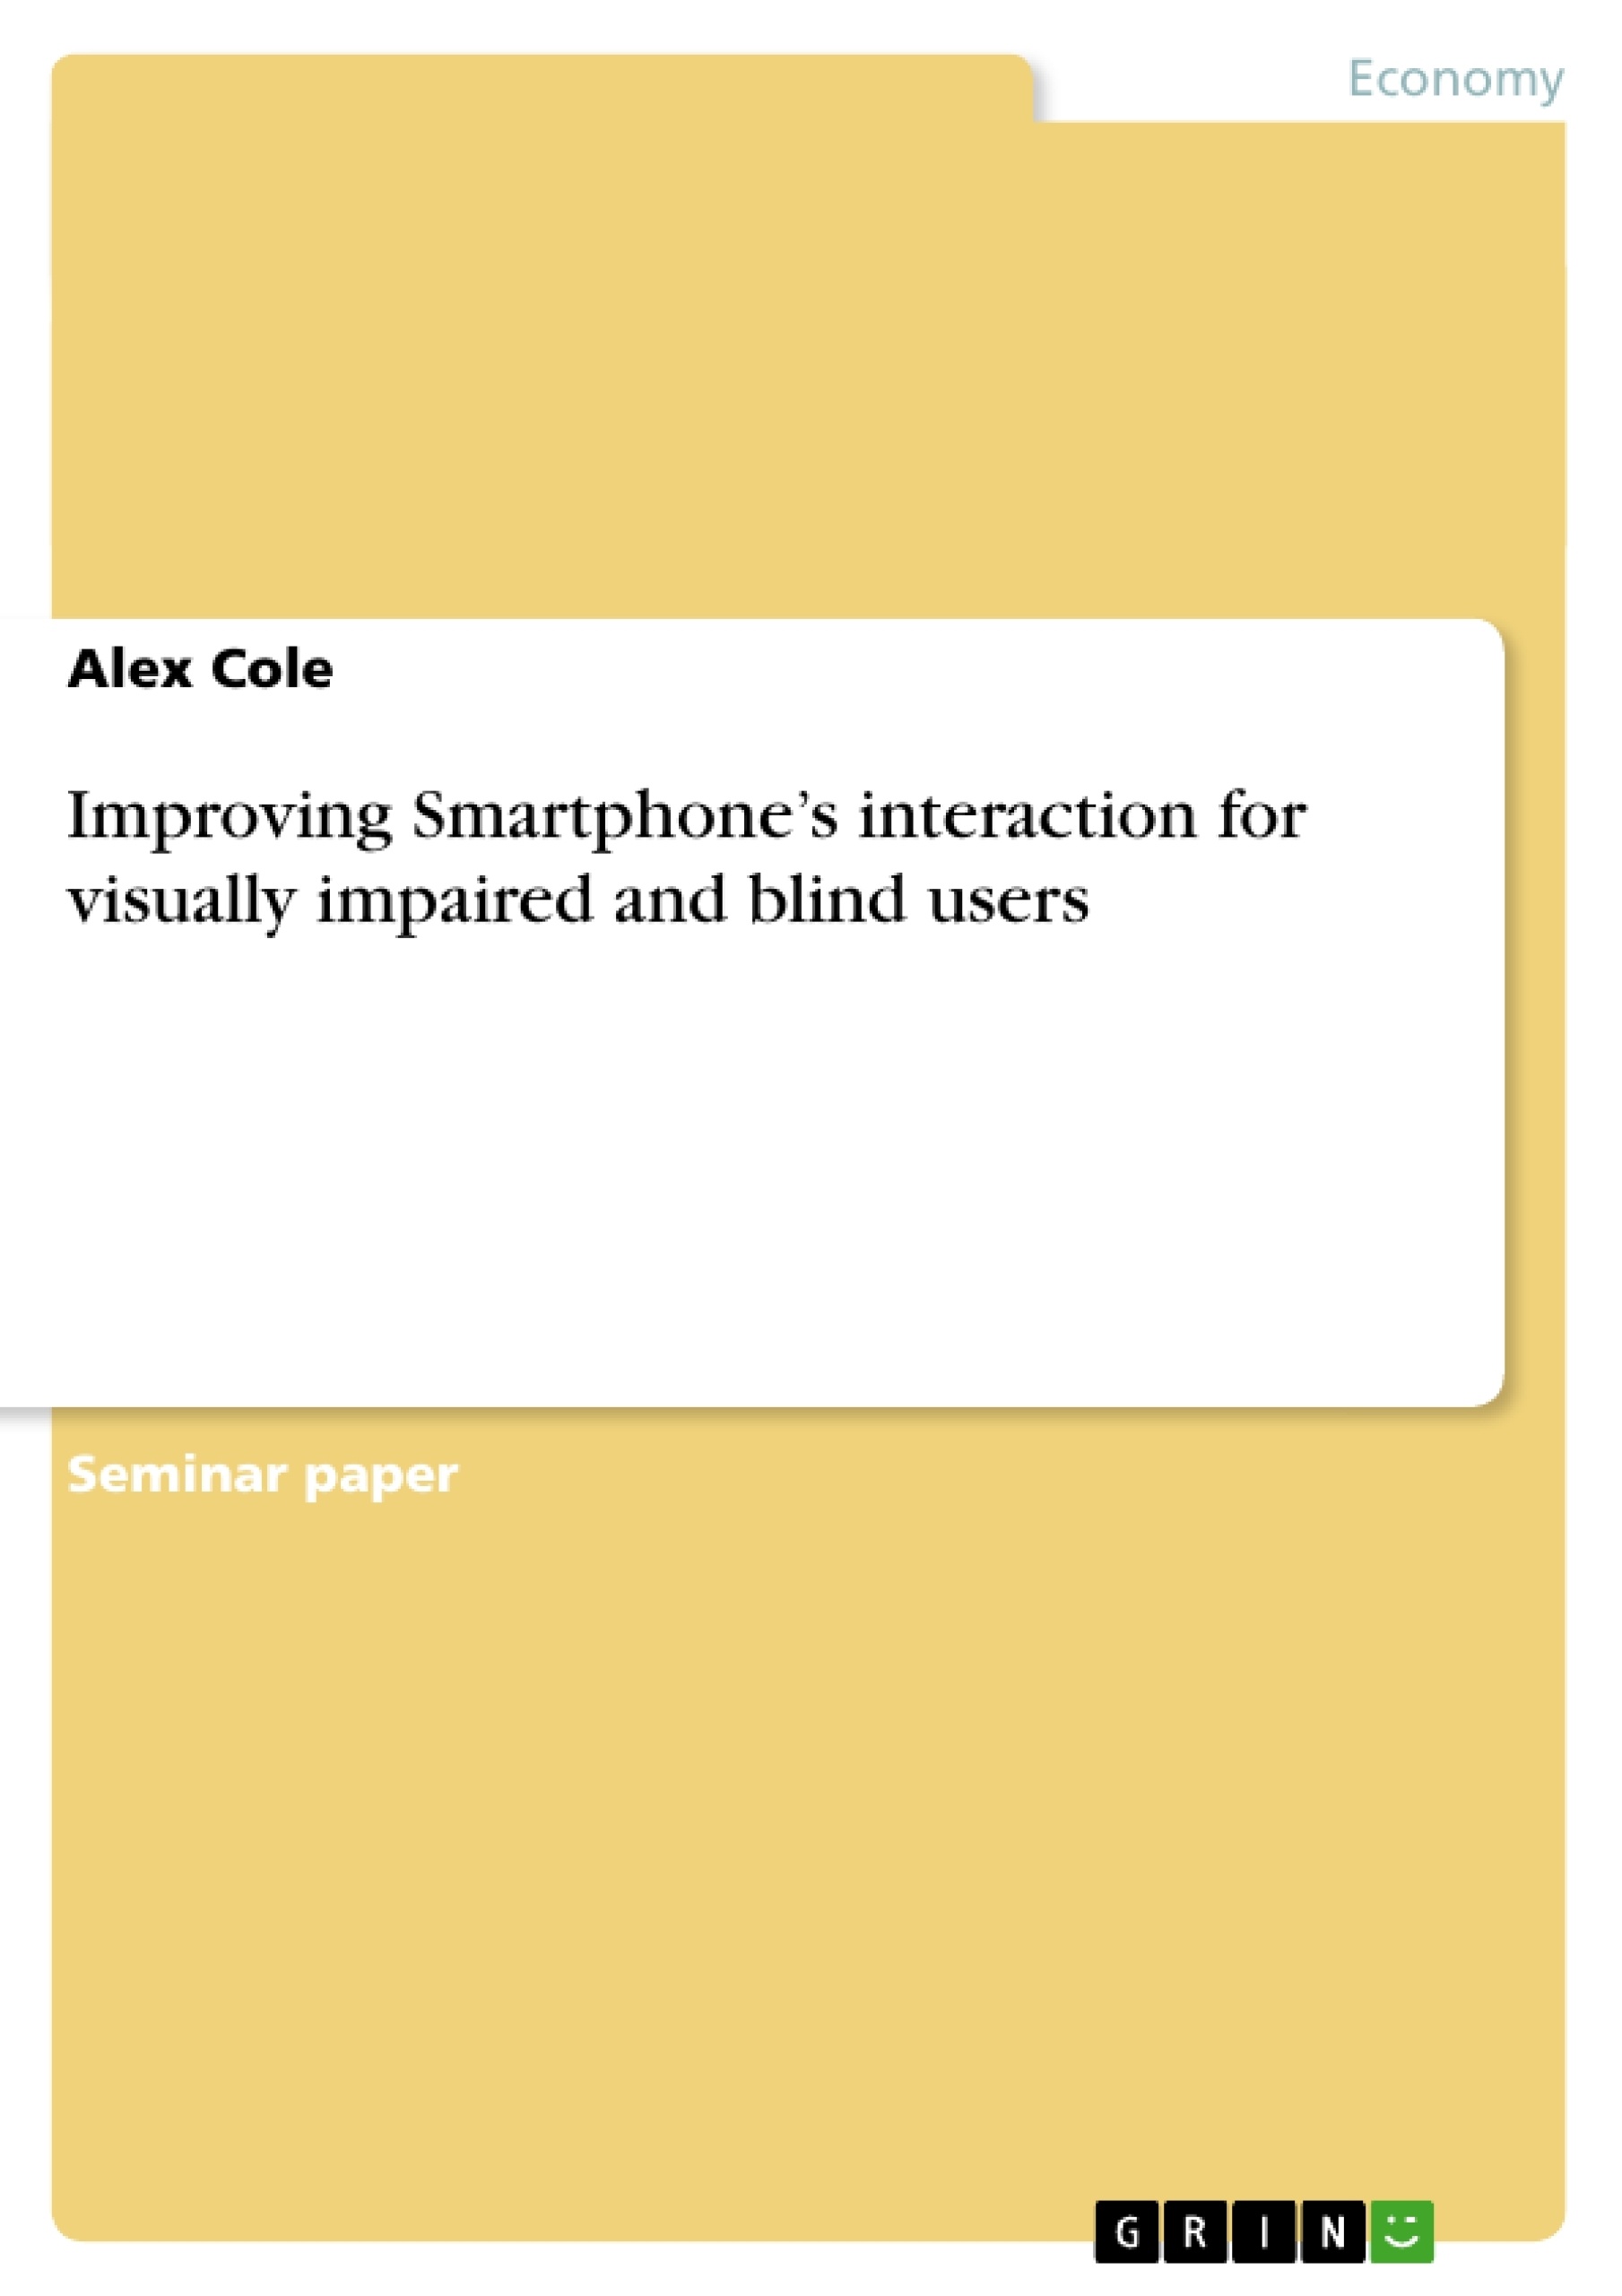 Title: Improving Smartphone’s interaction for visually impaired and blind users